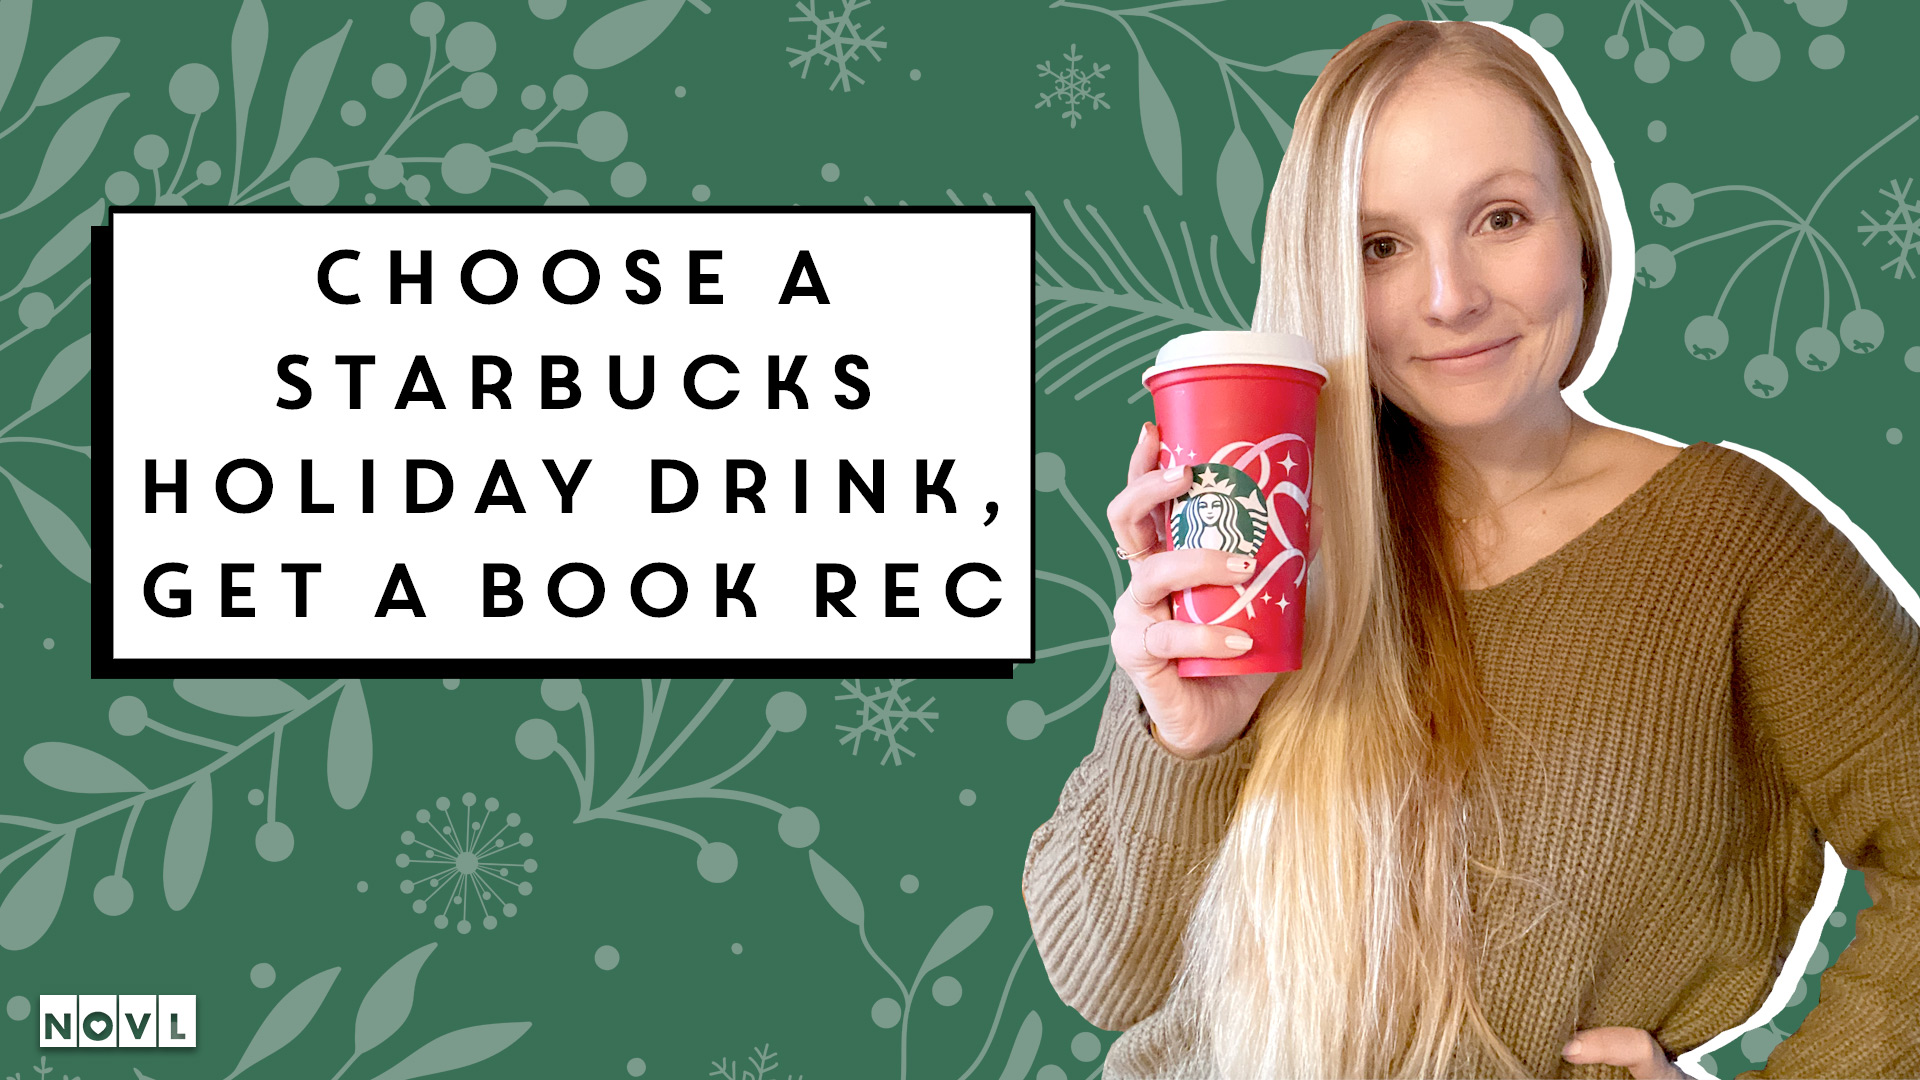 The NOVL Blog, Featured Image for Article: Choose a Starbucks Holiday Drink, Get a Book Rec